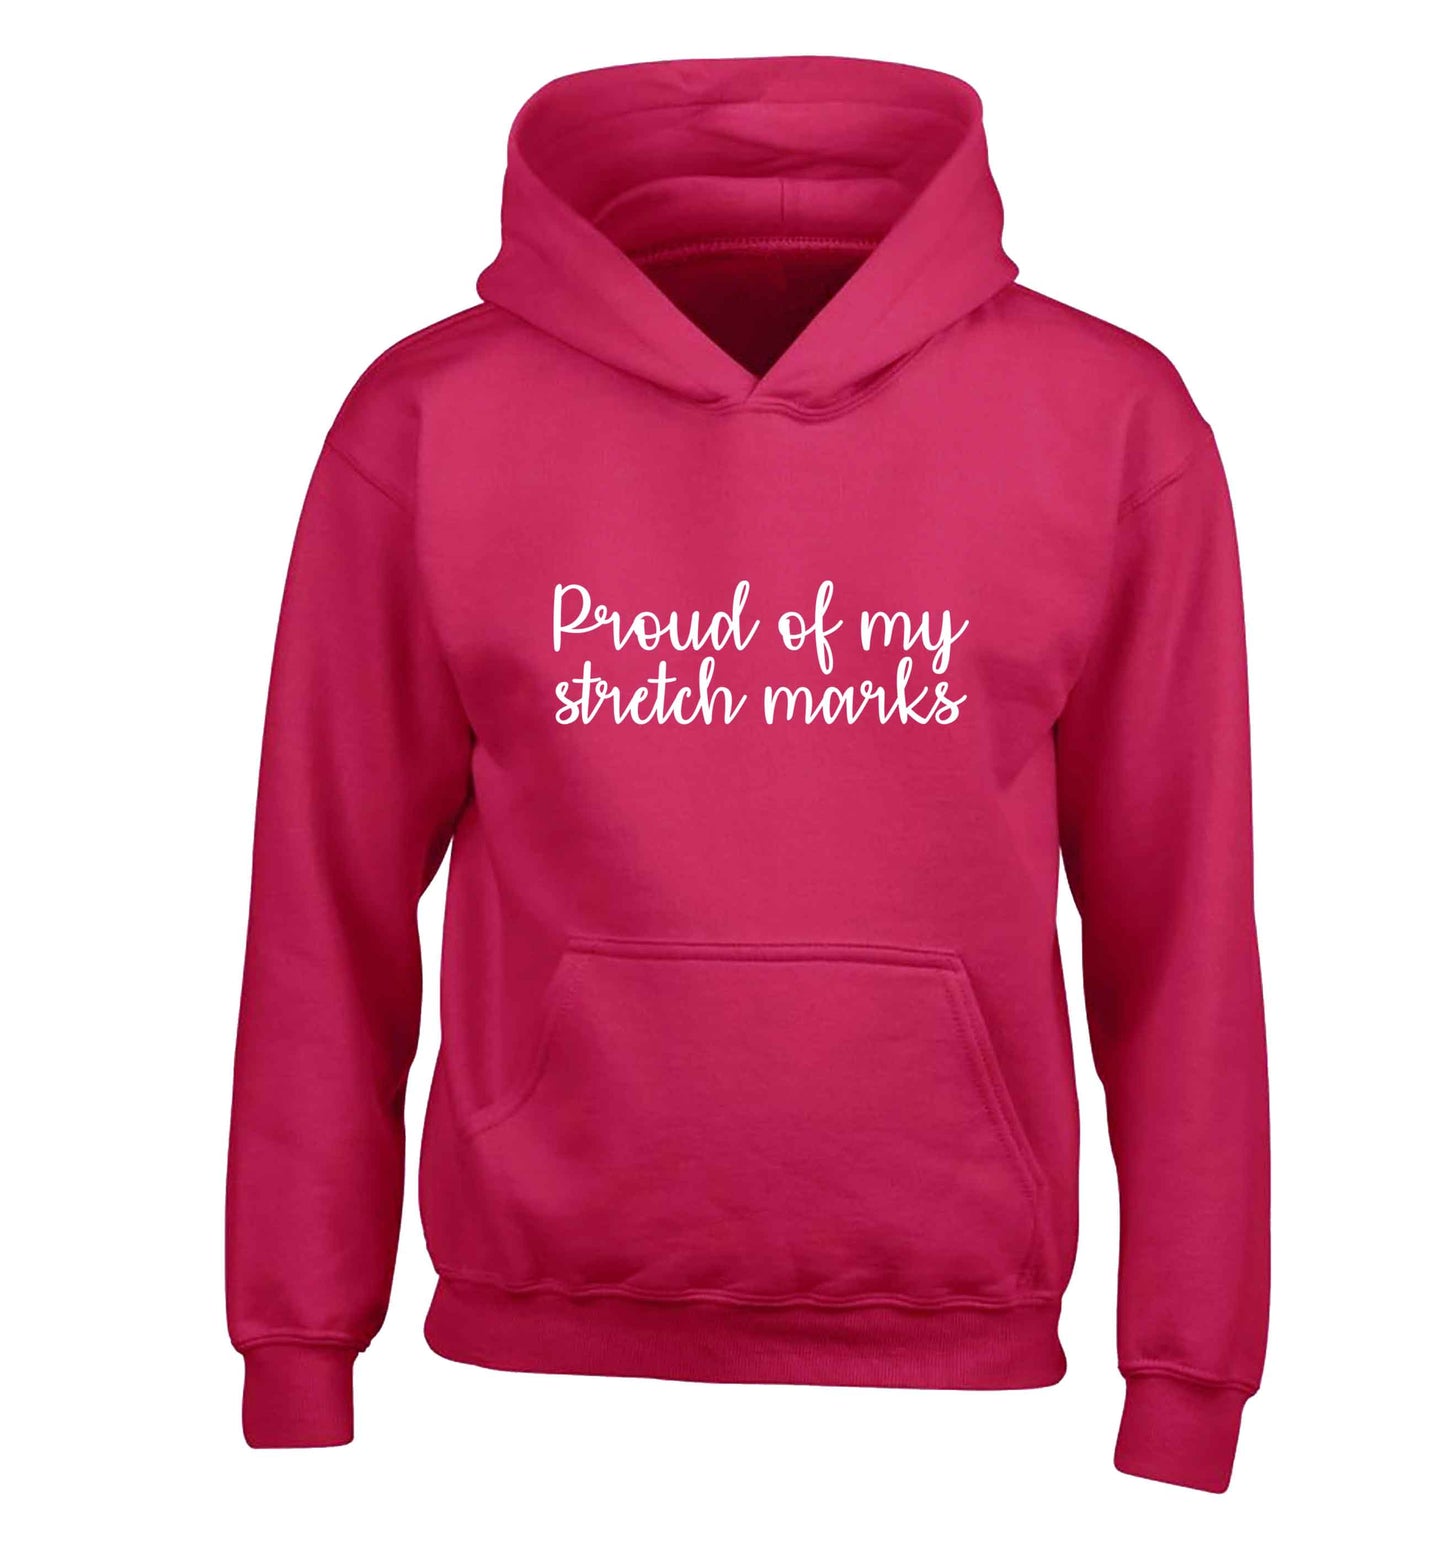 Proud of my stretch marks children's pink hoodie 12-13 Years